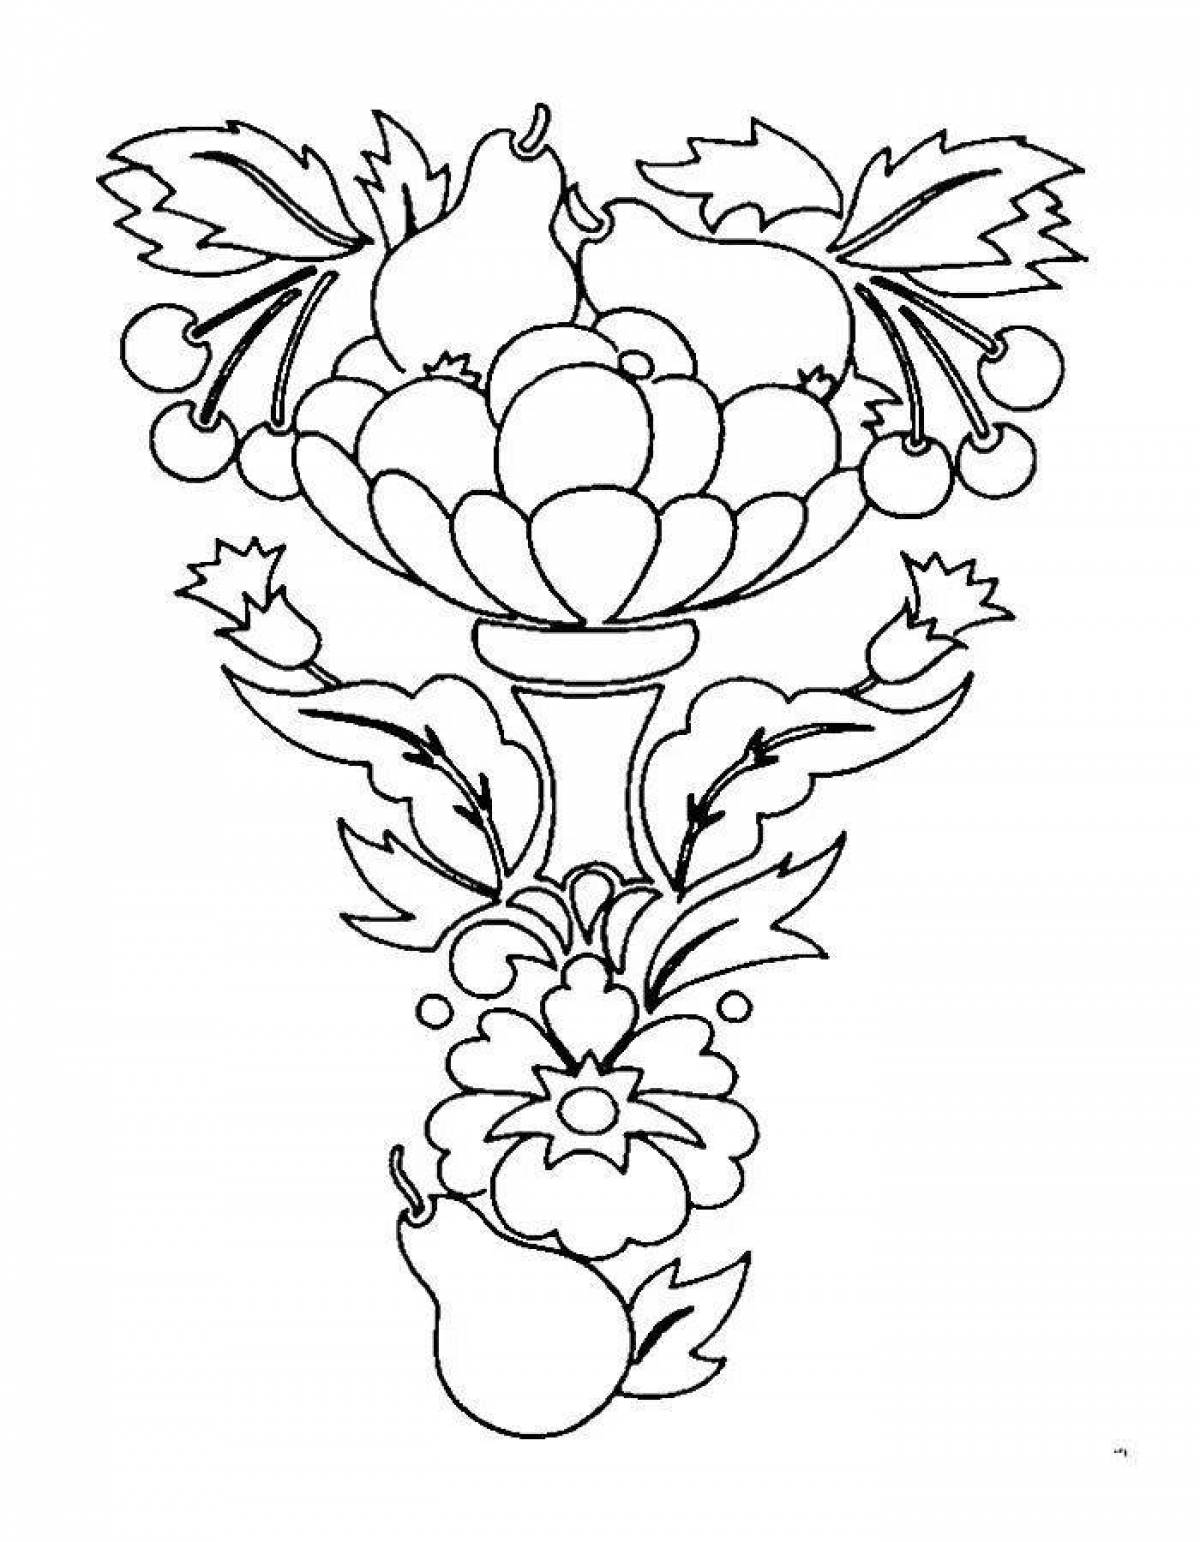 Cheerful still life with fruits coloring book